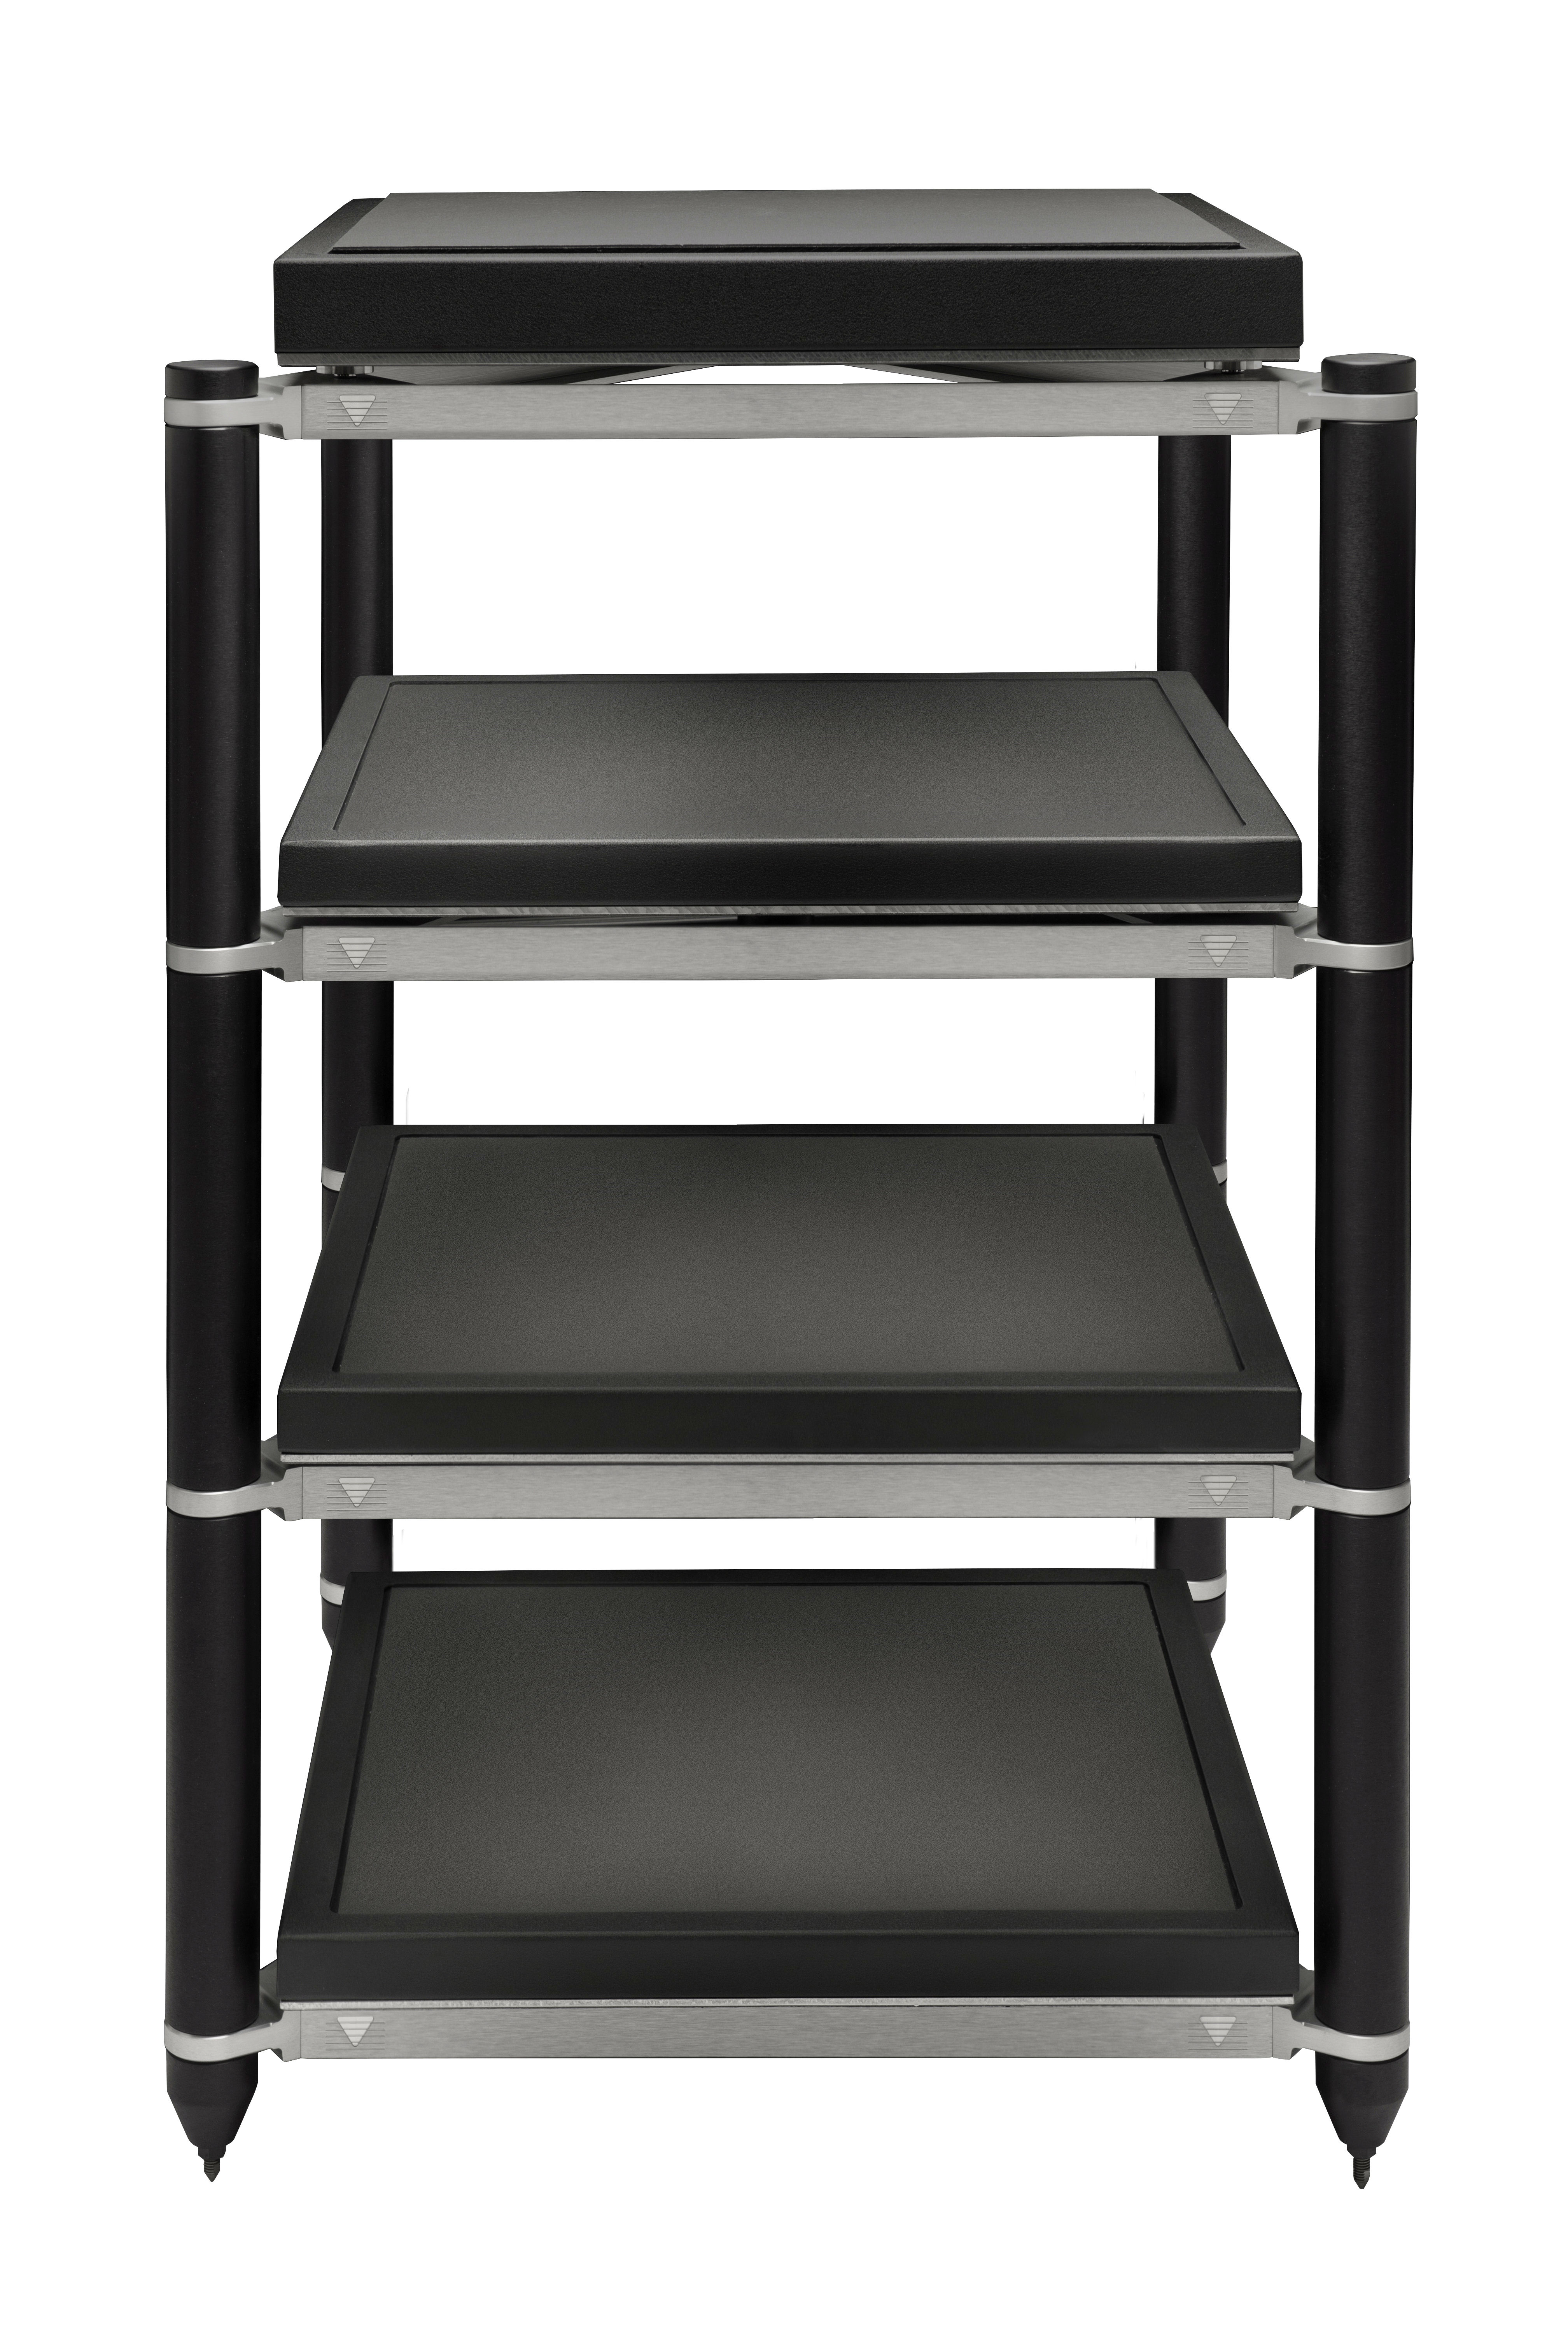 Critical Mass Systems Qxk Mk Iii Rack, On&On Shelving System